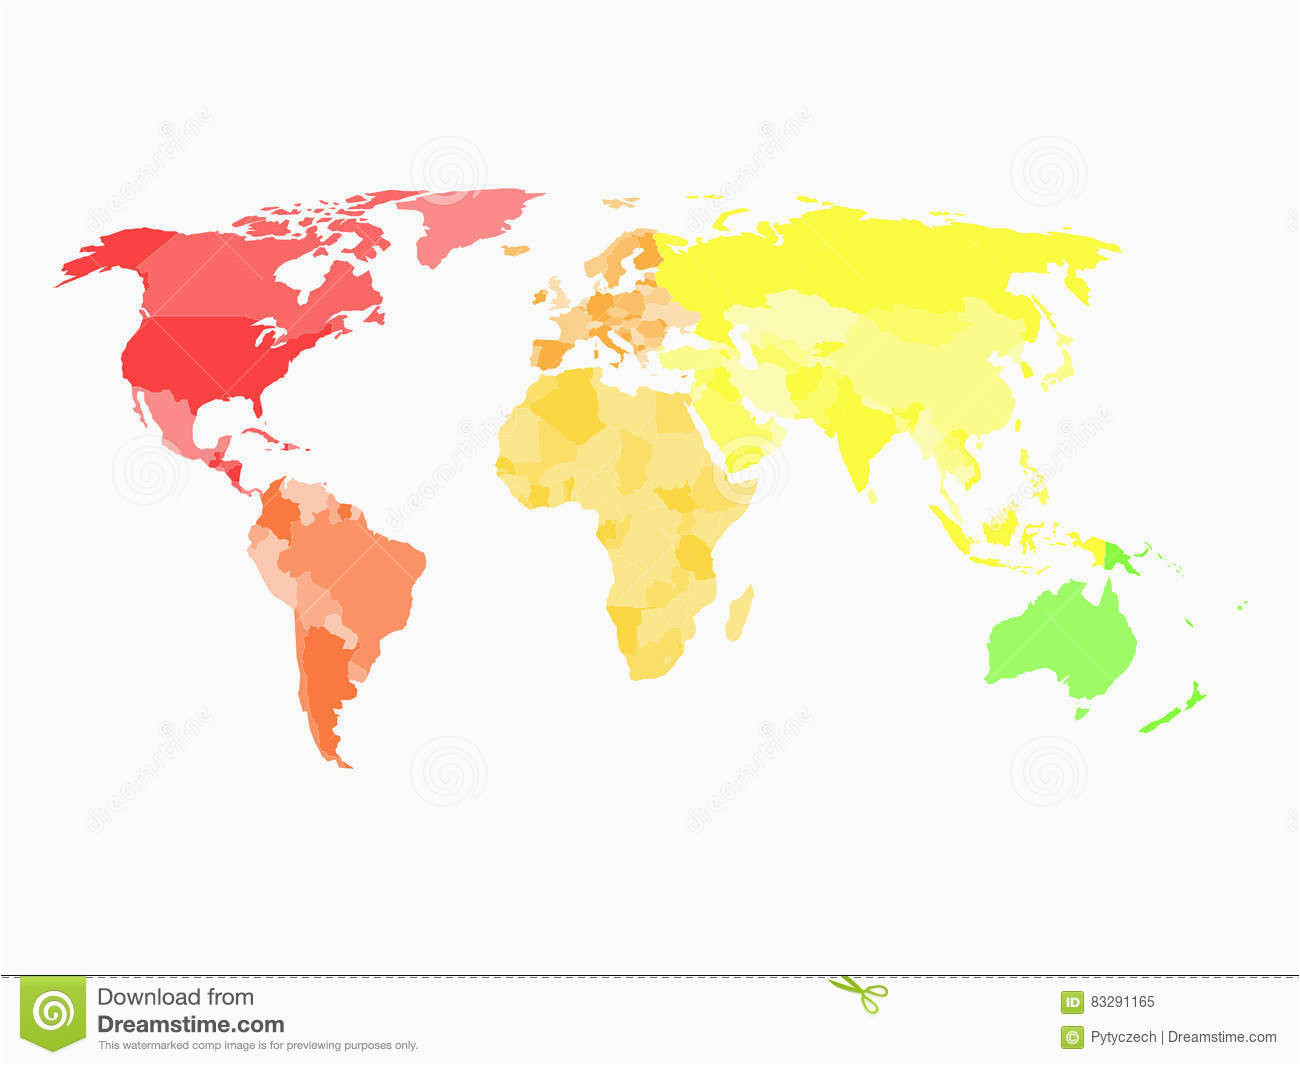 blank simplified political map of world in different colors